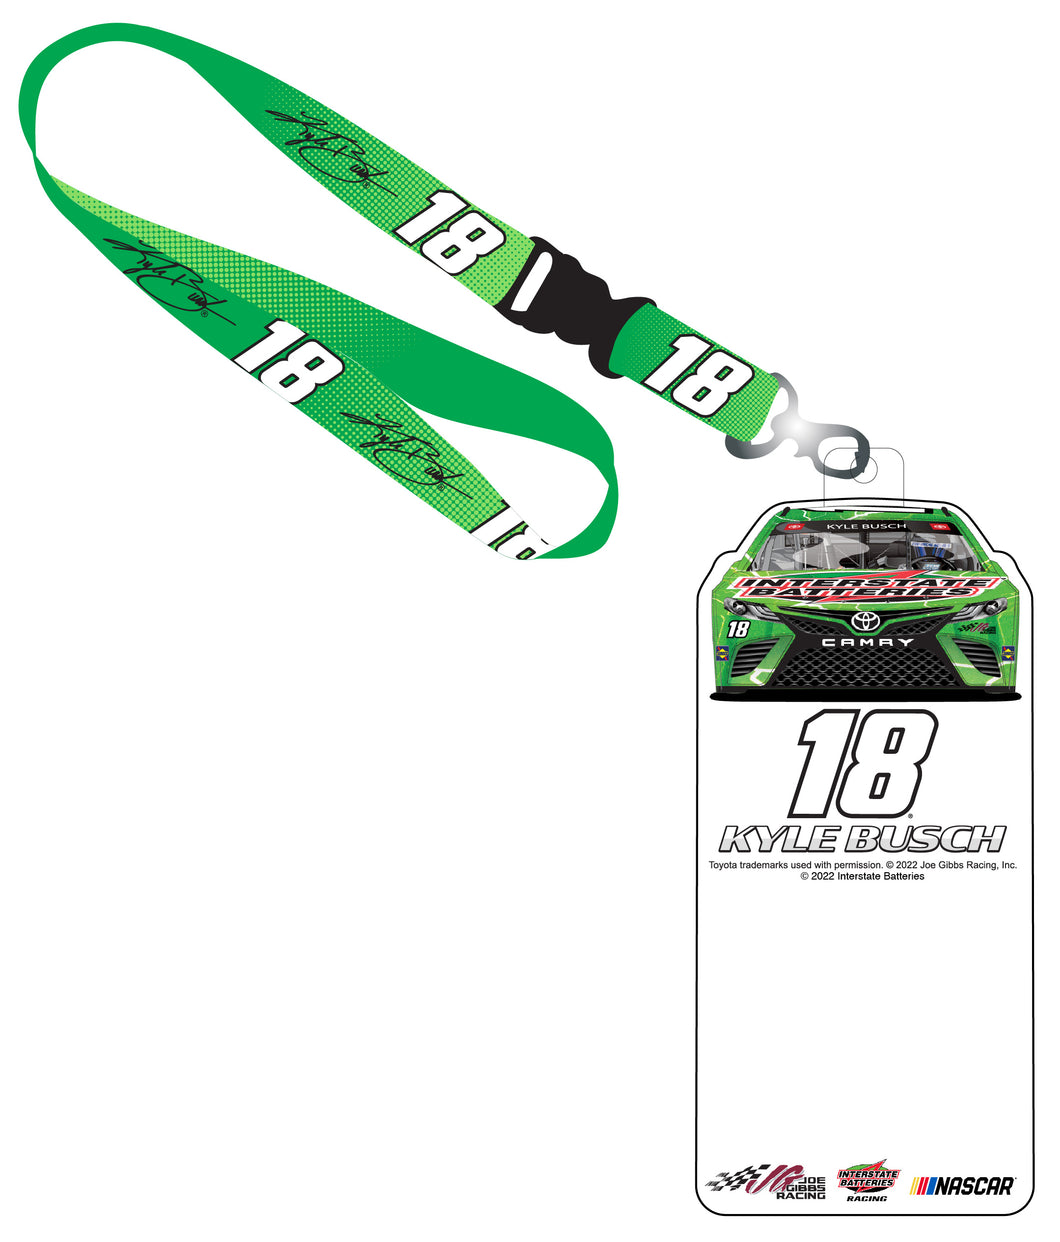 R and R Imports Kyle Busch #18 Nascar Credential Holder with Lanyard New for 2022